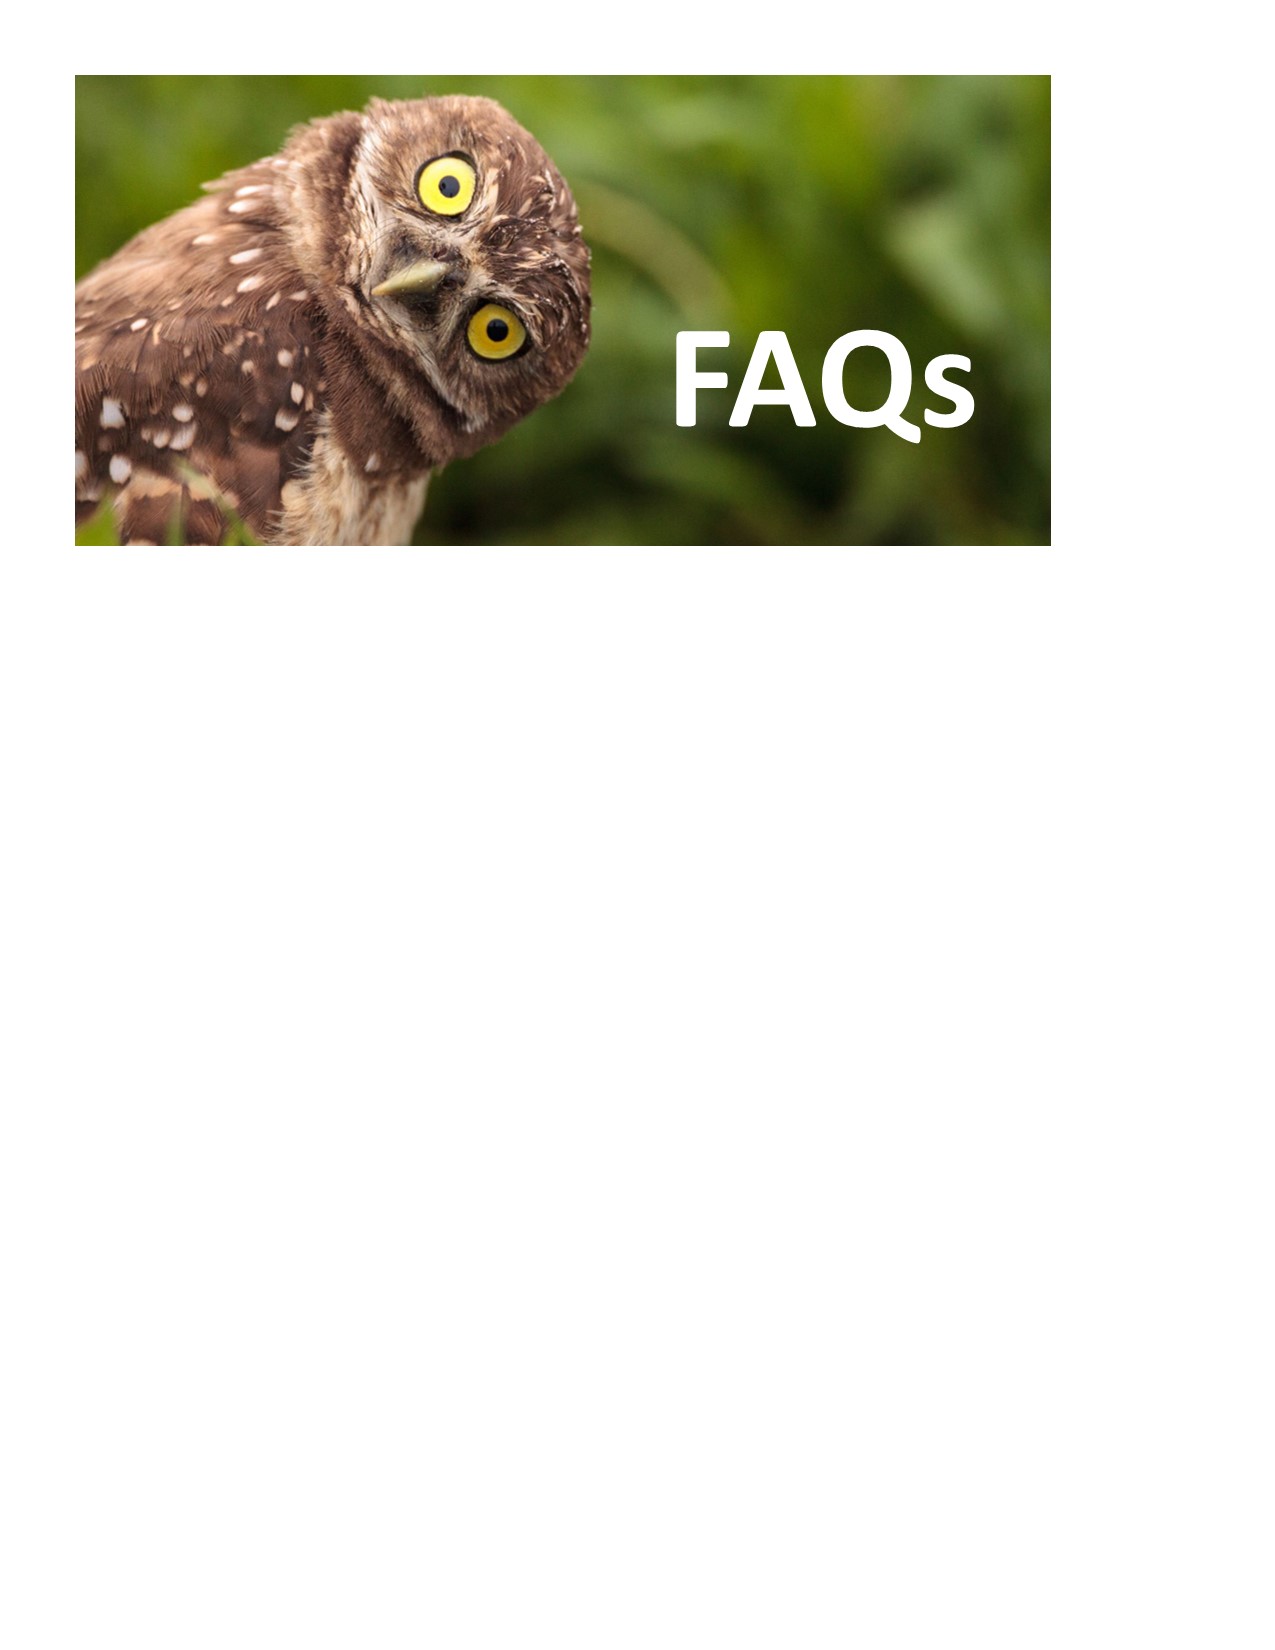 Owl - Frequently Asked Questions